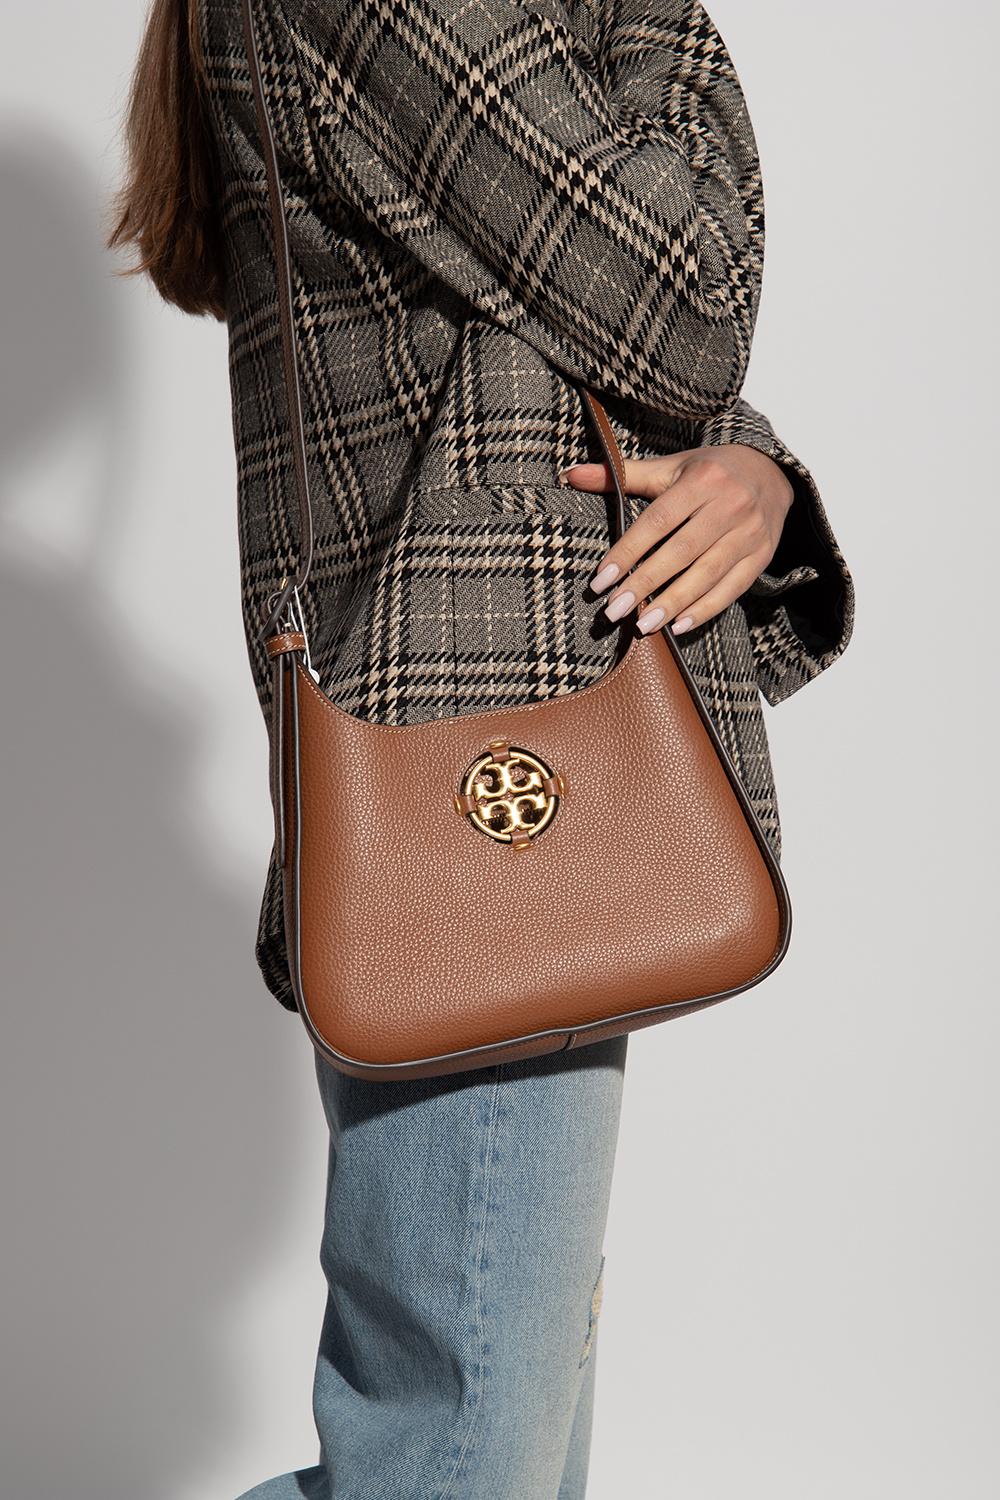 SHORT & SWEET  TORY BURCH MILLER MINI CROSSBODY COMPARED TO